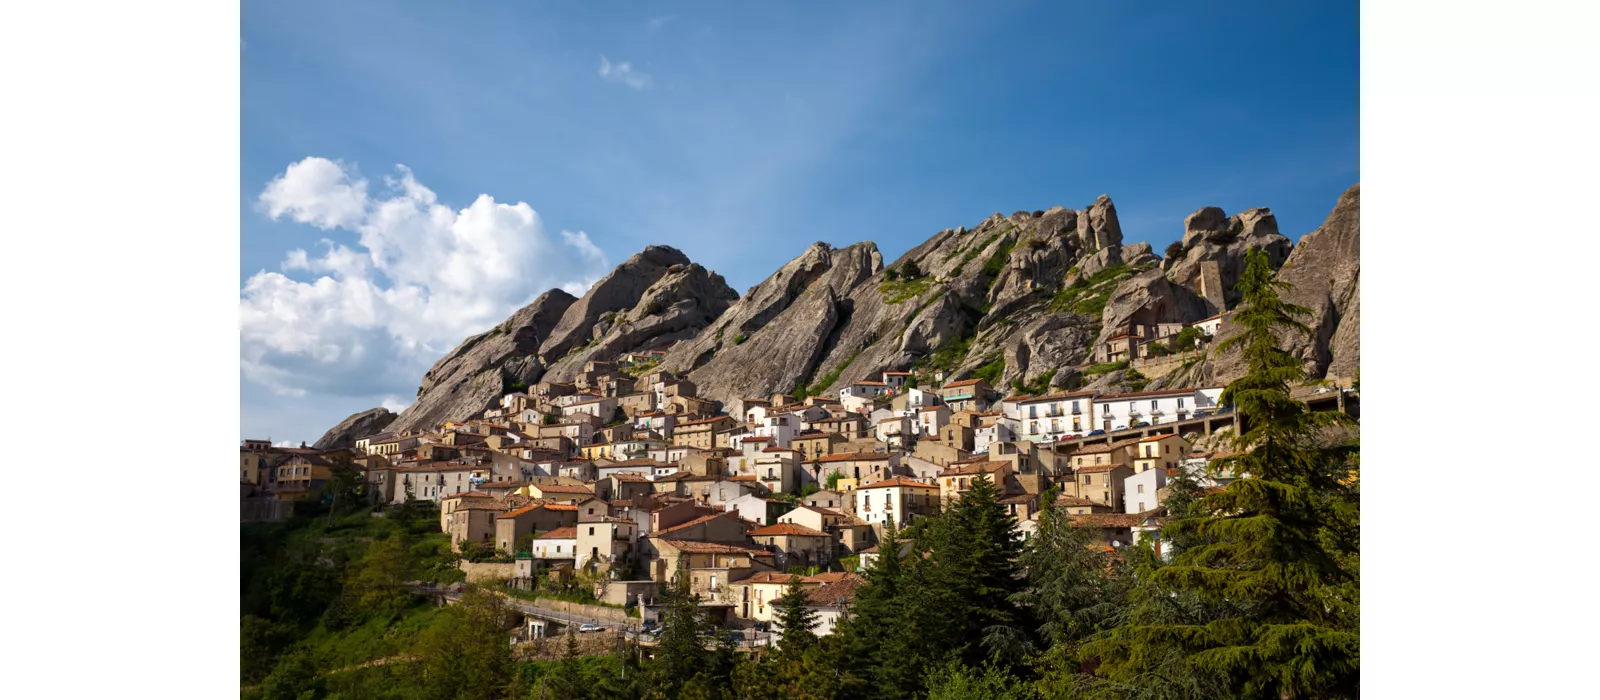 The Lower Basento: villages and parks in the hinterland of Basilicata